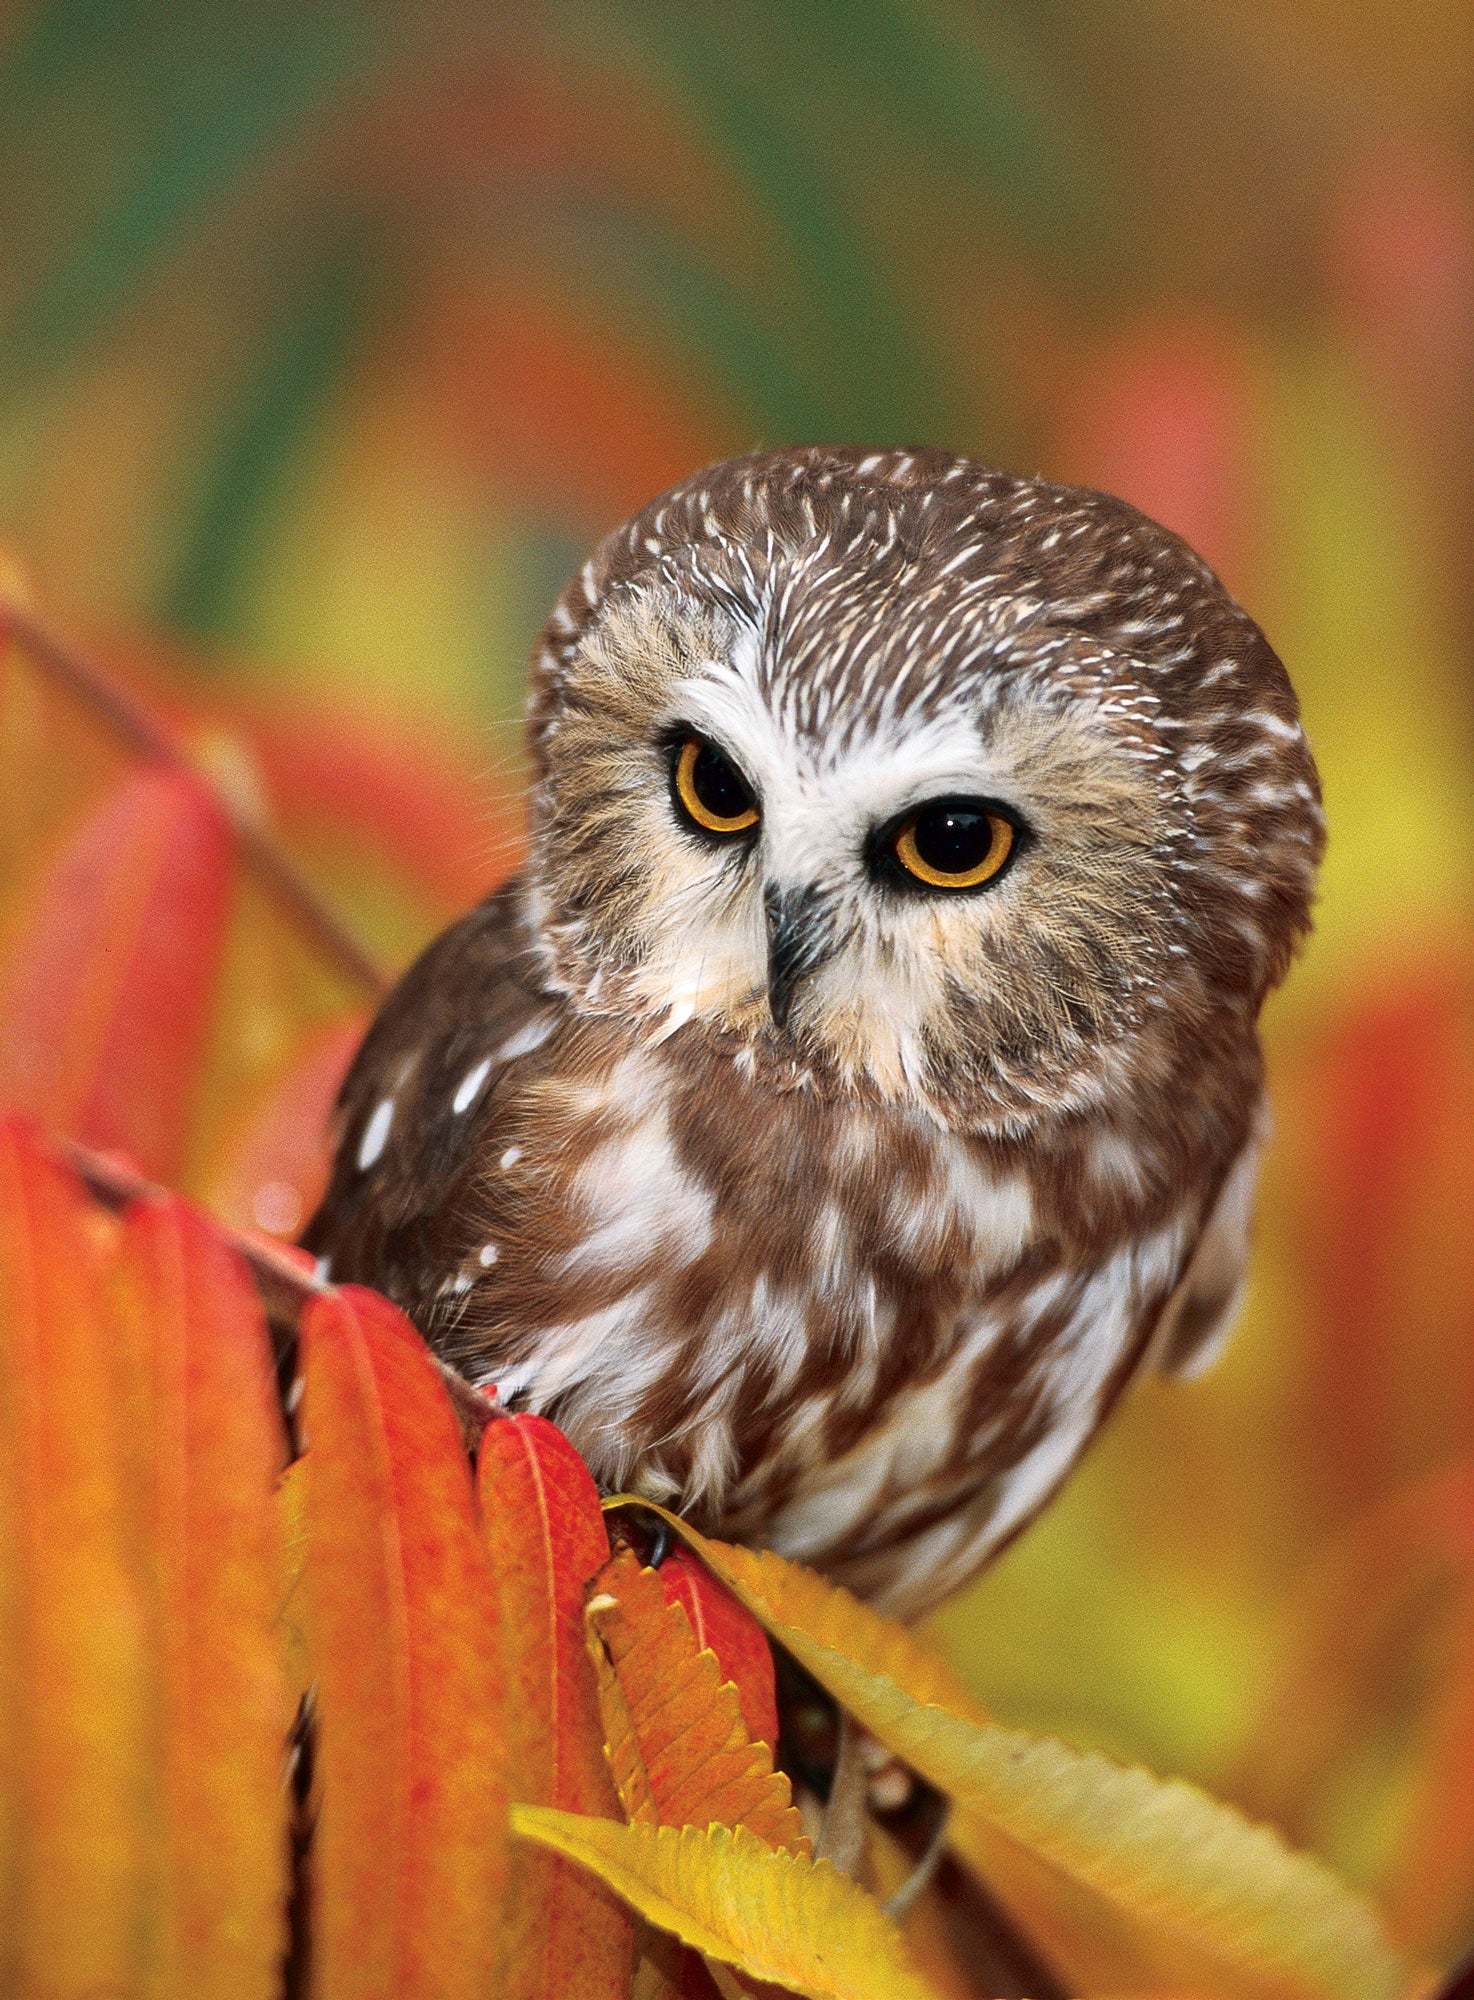 A saw-whet owl sitting on a branch. End of image description.